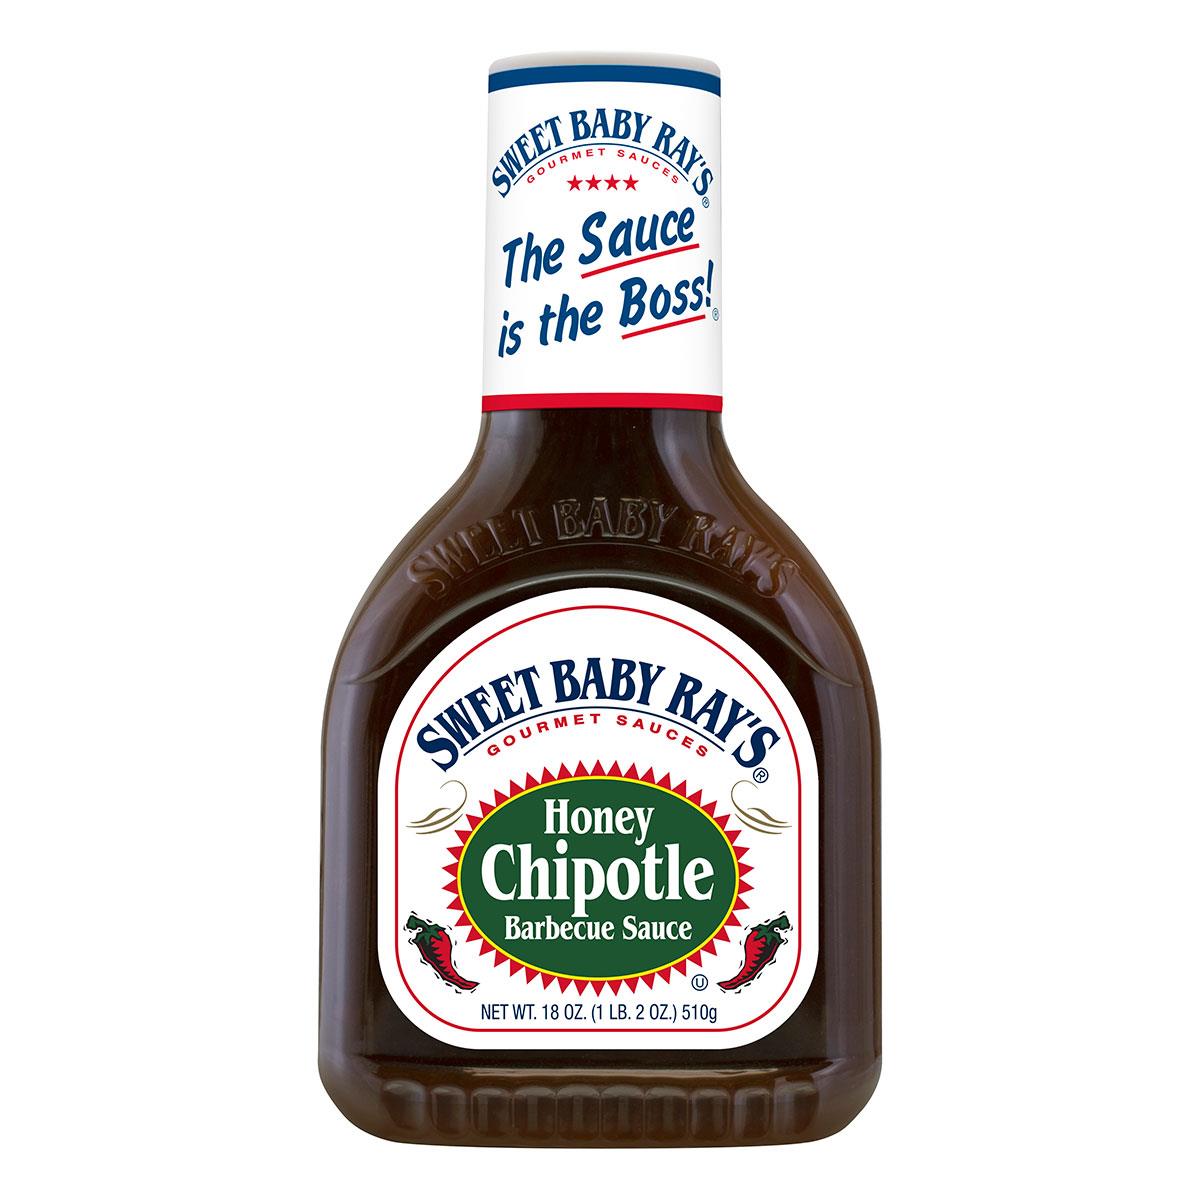 Sweet Baby Rays Honey Chipotle Barbecue Sauce 510gr.